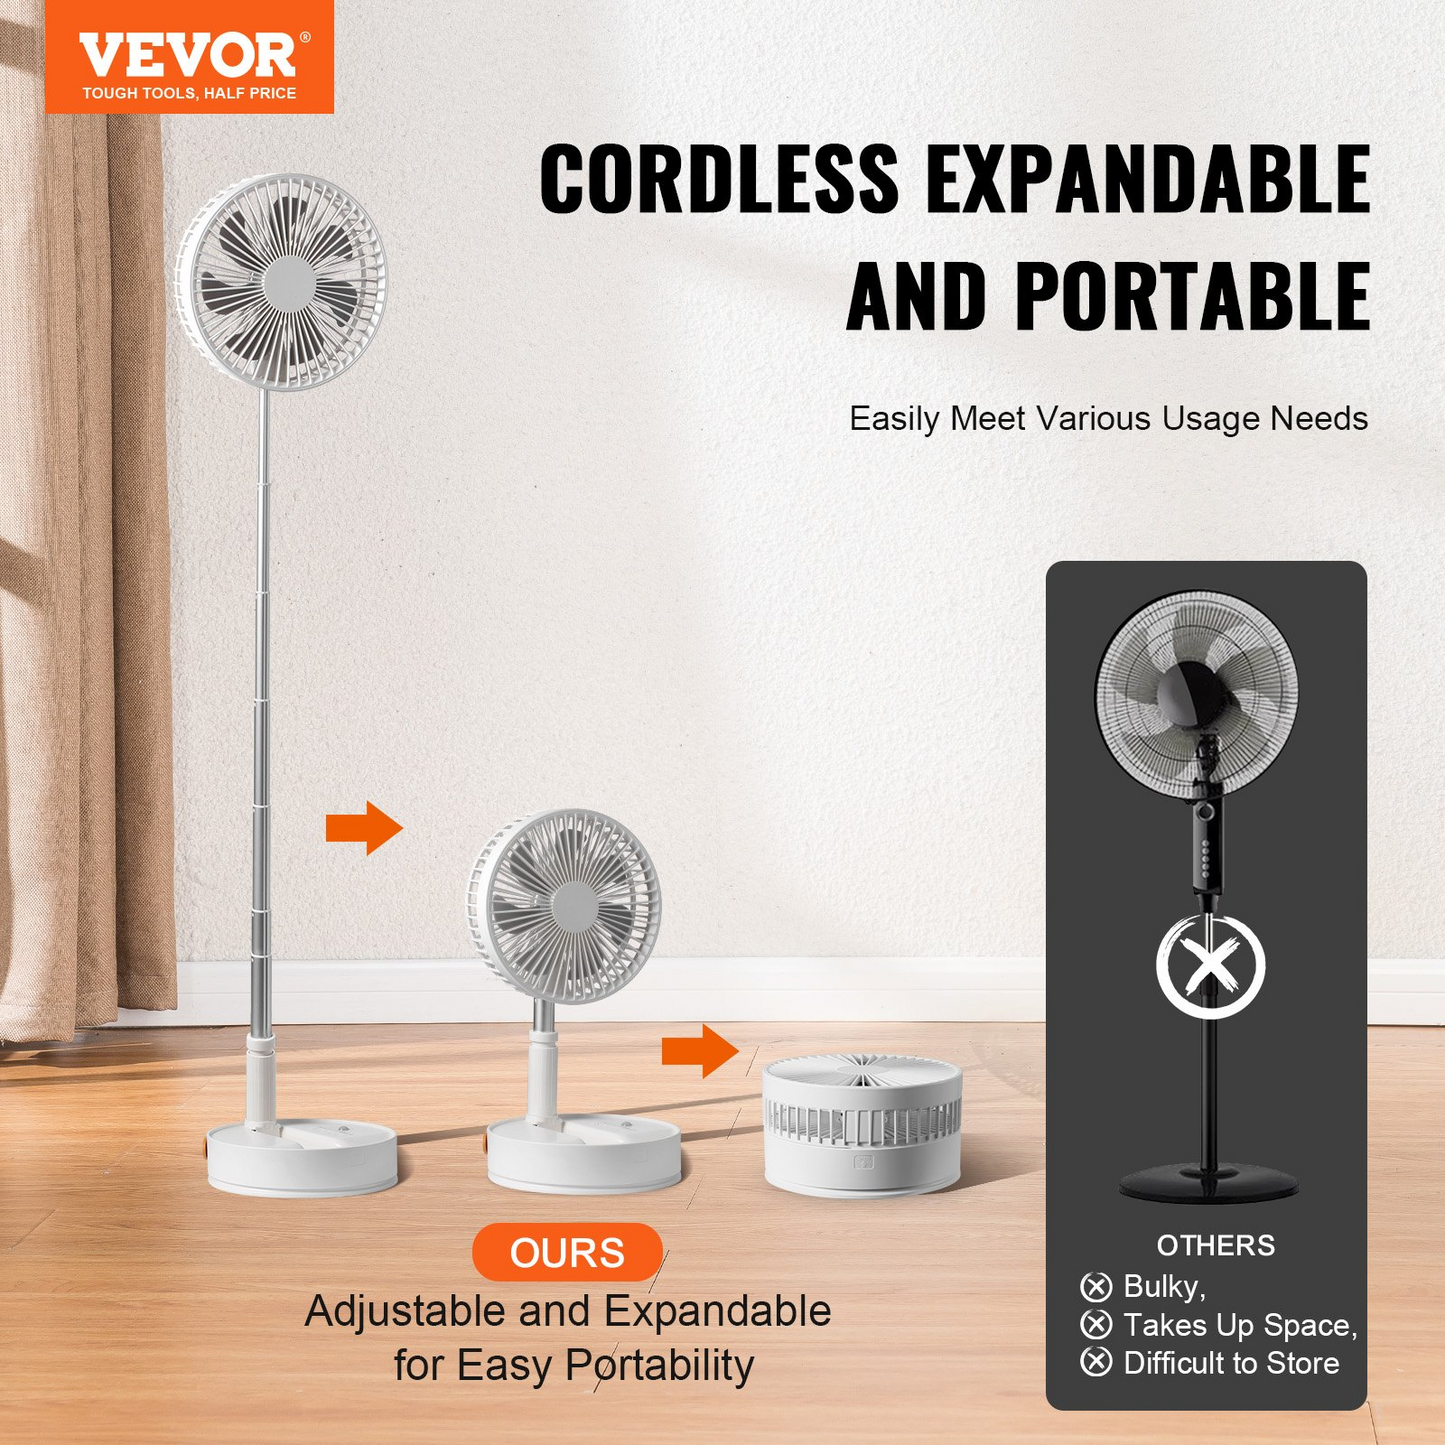 VEVOR 8 Inch Foldable Oscillating Standing Fan with Remote Control, 4 Speed Adjustable Portable Desk Quiet Fan, 7200mah Rechargeable USB Small Fan, Folded Rotating Floor Fan for Bedroom Office Travel, Goodies N Stuff